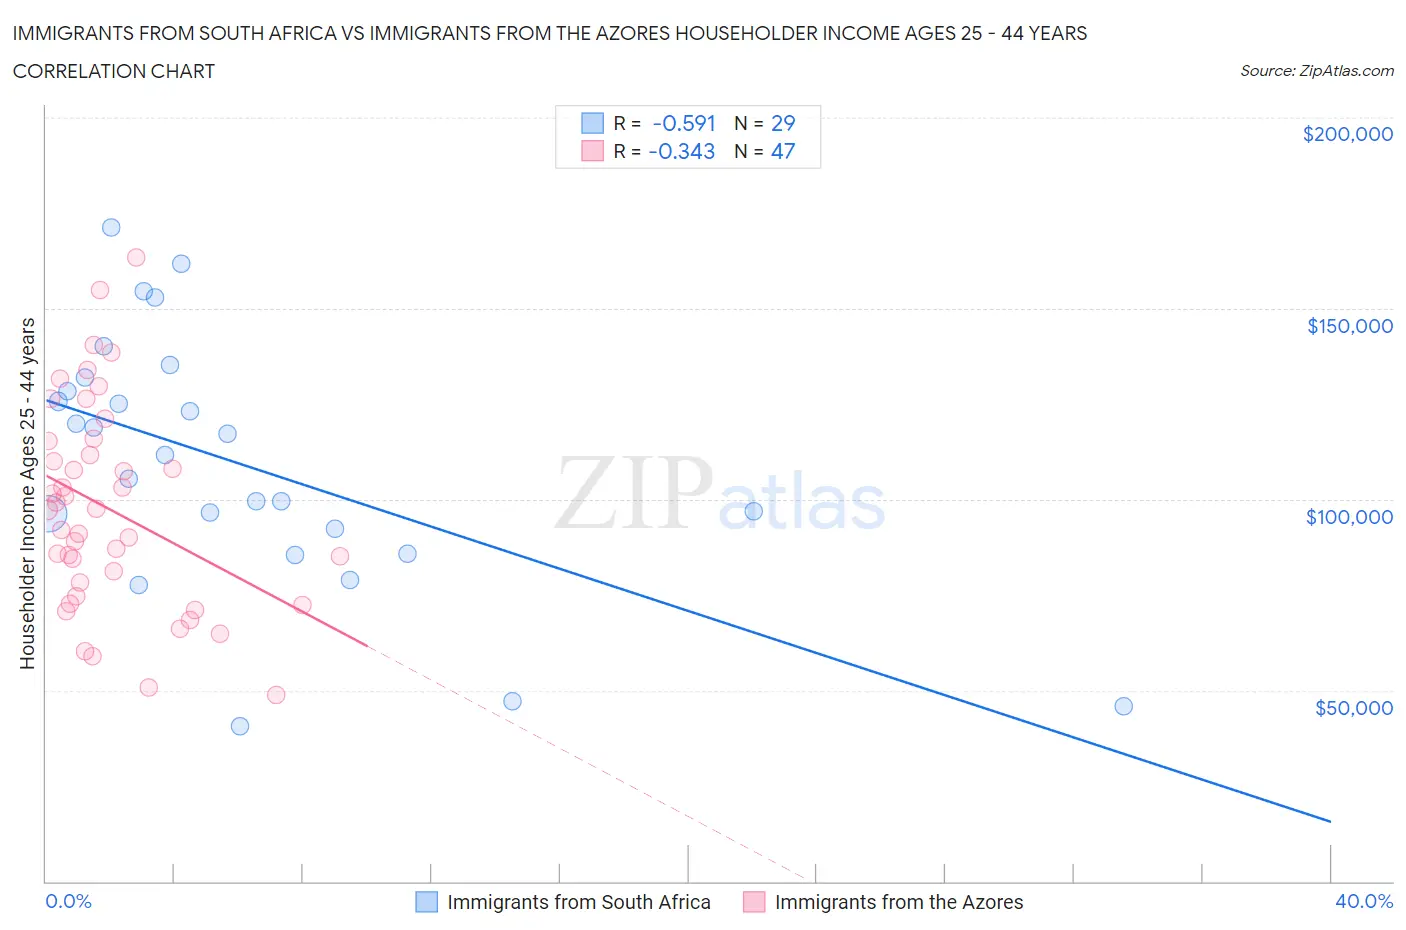 Immigrants from South Africa vs Immigrants from the Azores Householder Income Ages 25 - 44 years